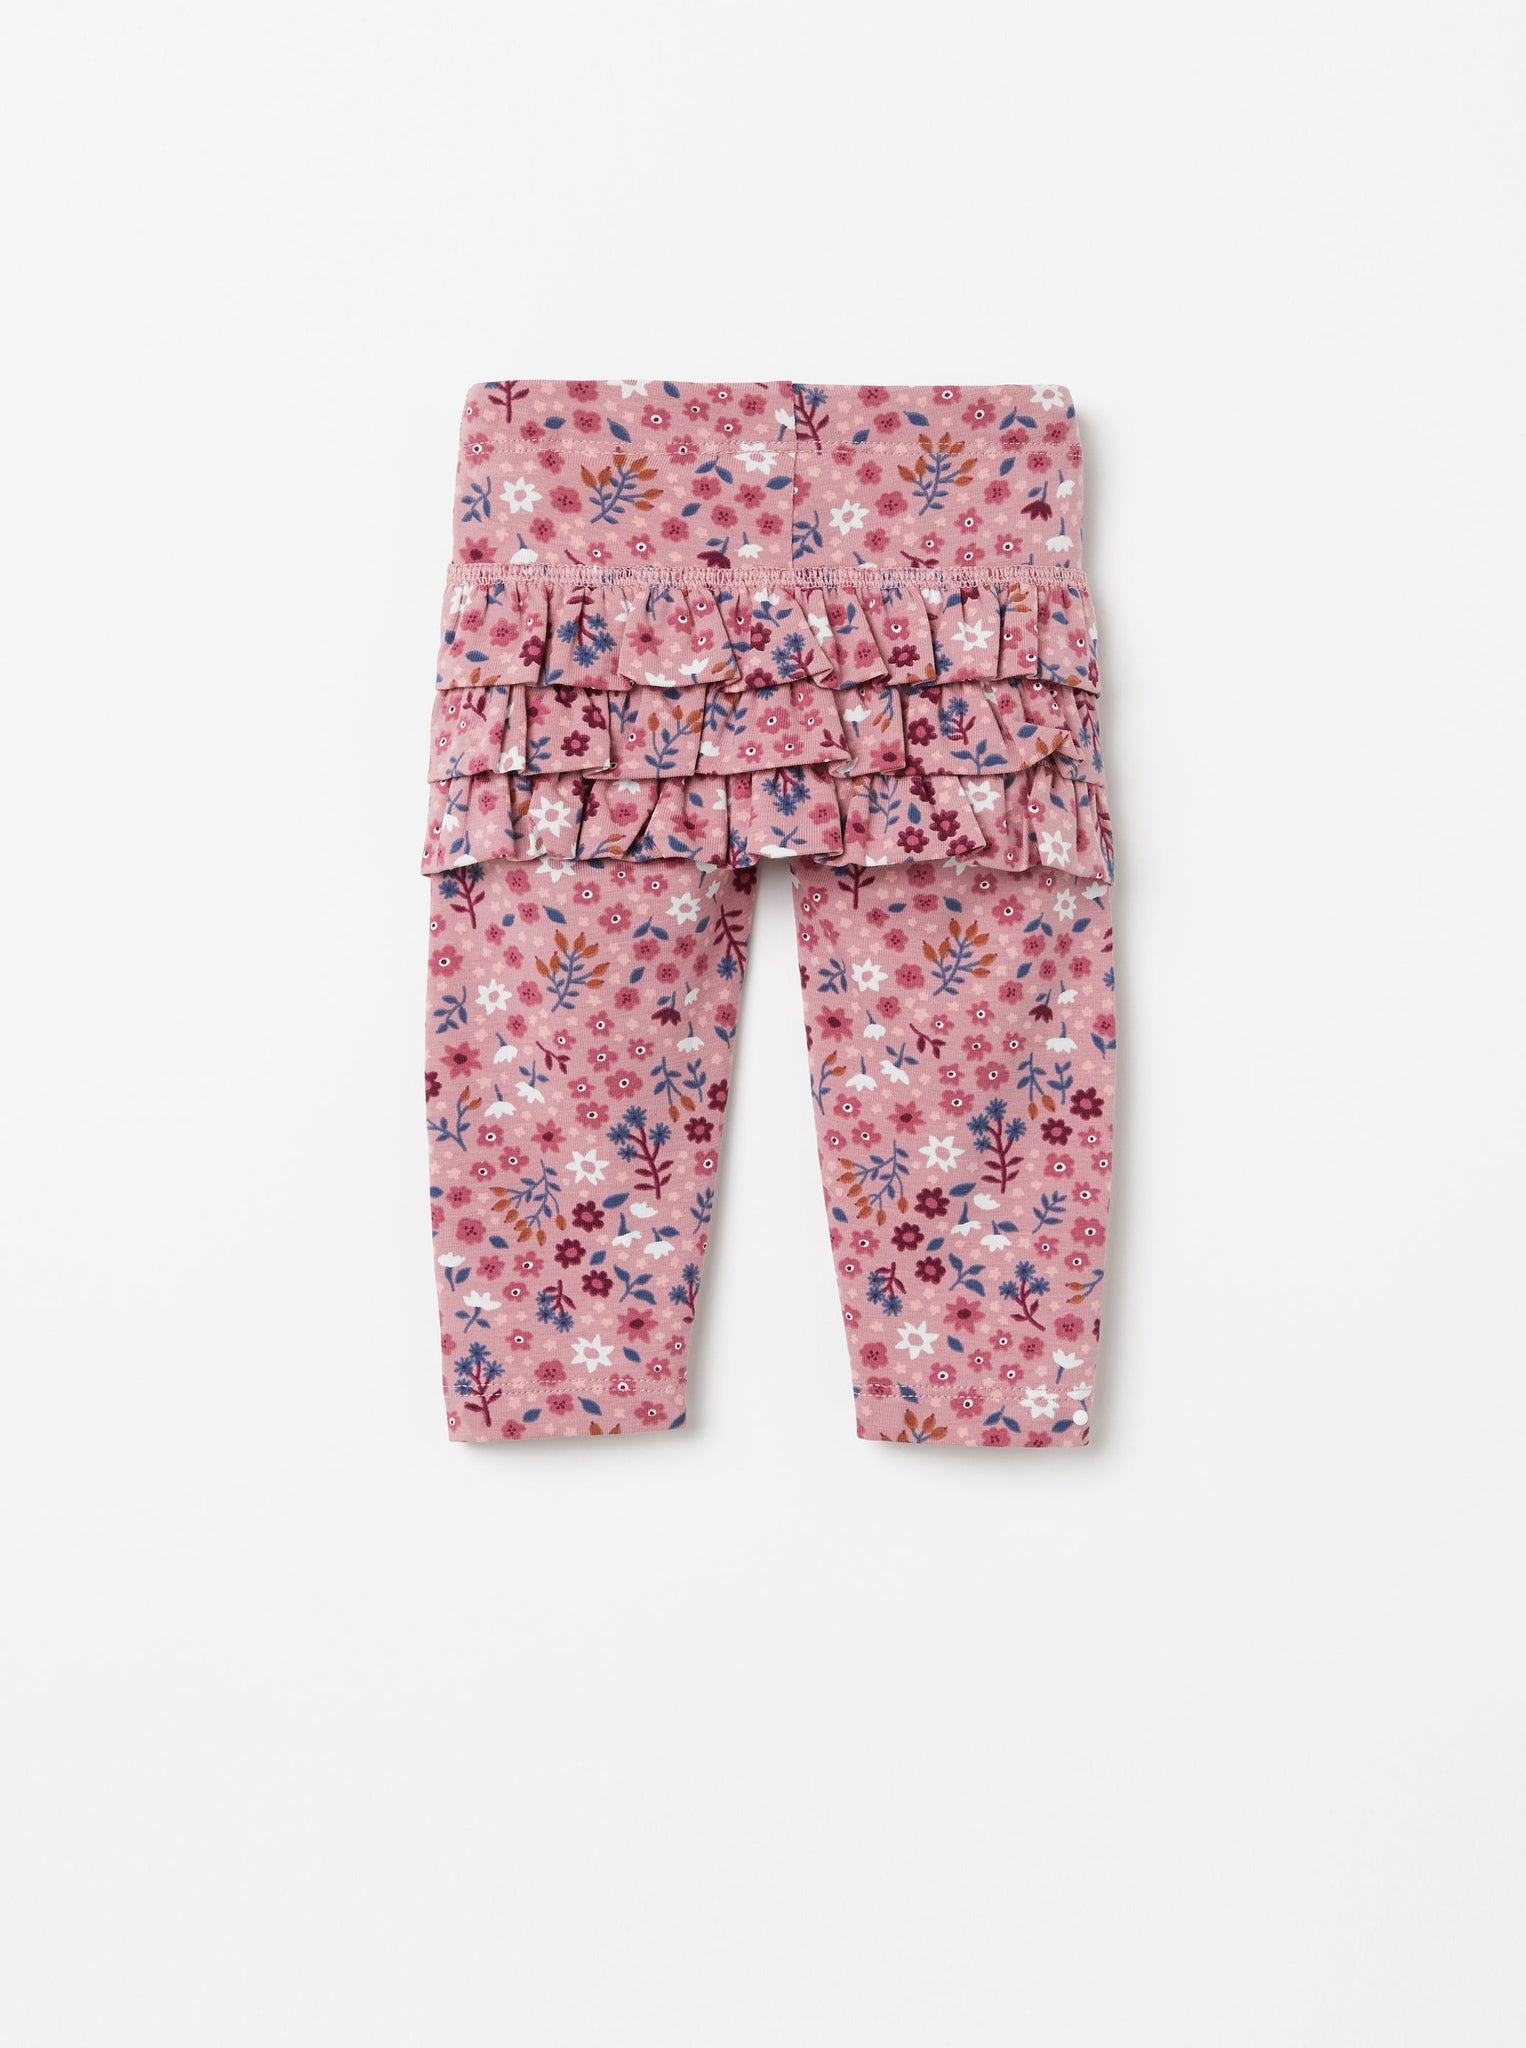 A pair of flower-patterned leggings with a pretty ruffle at the back, in soft organic cotton for baby. The waist is elastic and can be adjusted with buttonhole elastic.

Country of manufacture: Turkey
Factory: Tyh Uluslararasi Tekstil Pazarlama AS
Find out more at https://www.polarnopyret.com/pop-cares/our-suppliers